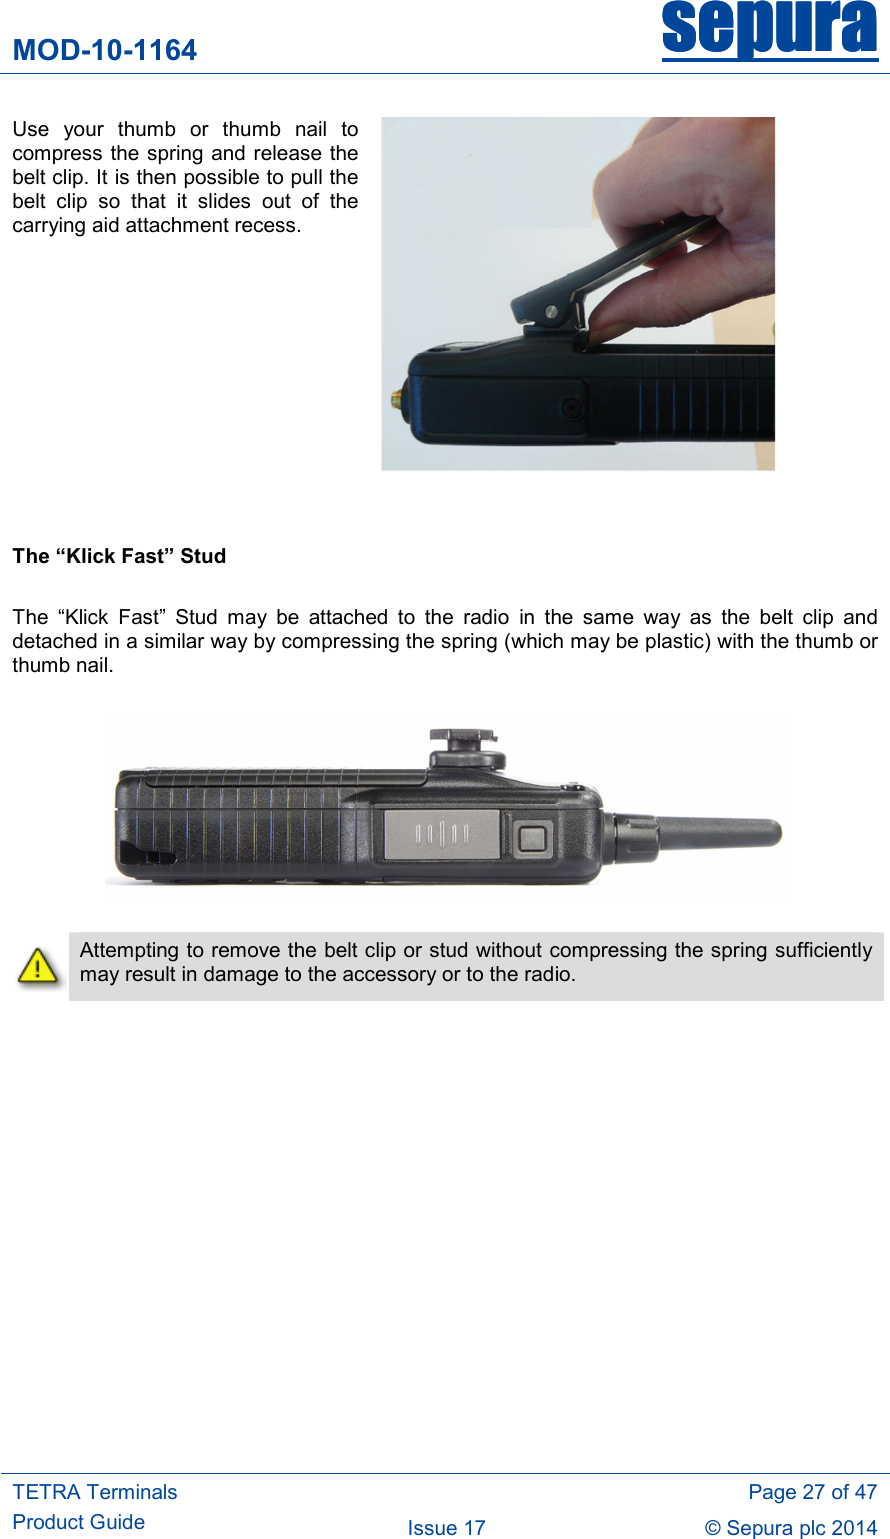 MOD-10-1164 sepurasepurasepurasepura     TETRA Terminals Product Guide   Page 27 of 47 Issue 17  © Sepura plc 2014   Use  your  thumb  or  thumb  nail  to compress  the spring and release  the belt clip. It is then possible to pull the belt  clip  so  that  it  slides  out  of  the carrying aid attachment recess.      The “Klick Fast” Stud  The  “Klick  Fast”  Stud  may  be  attached  to  the  radio  in  the  same  way  as  the  belt  clip  and detached in a similar way by compressing the spring (which may be plastic) with the thumb or thumb nail.      Attempting to remove the belt clip or stud without compressing the spring sufficiently may result in damage to the accessory or to the radio. 